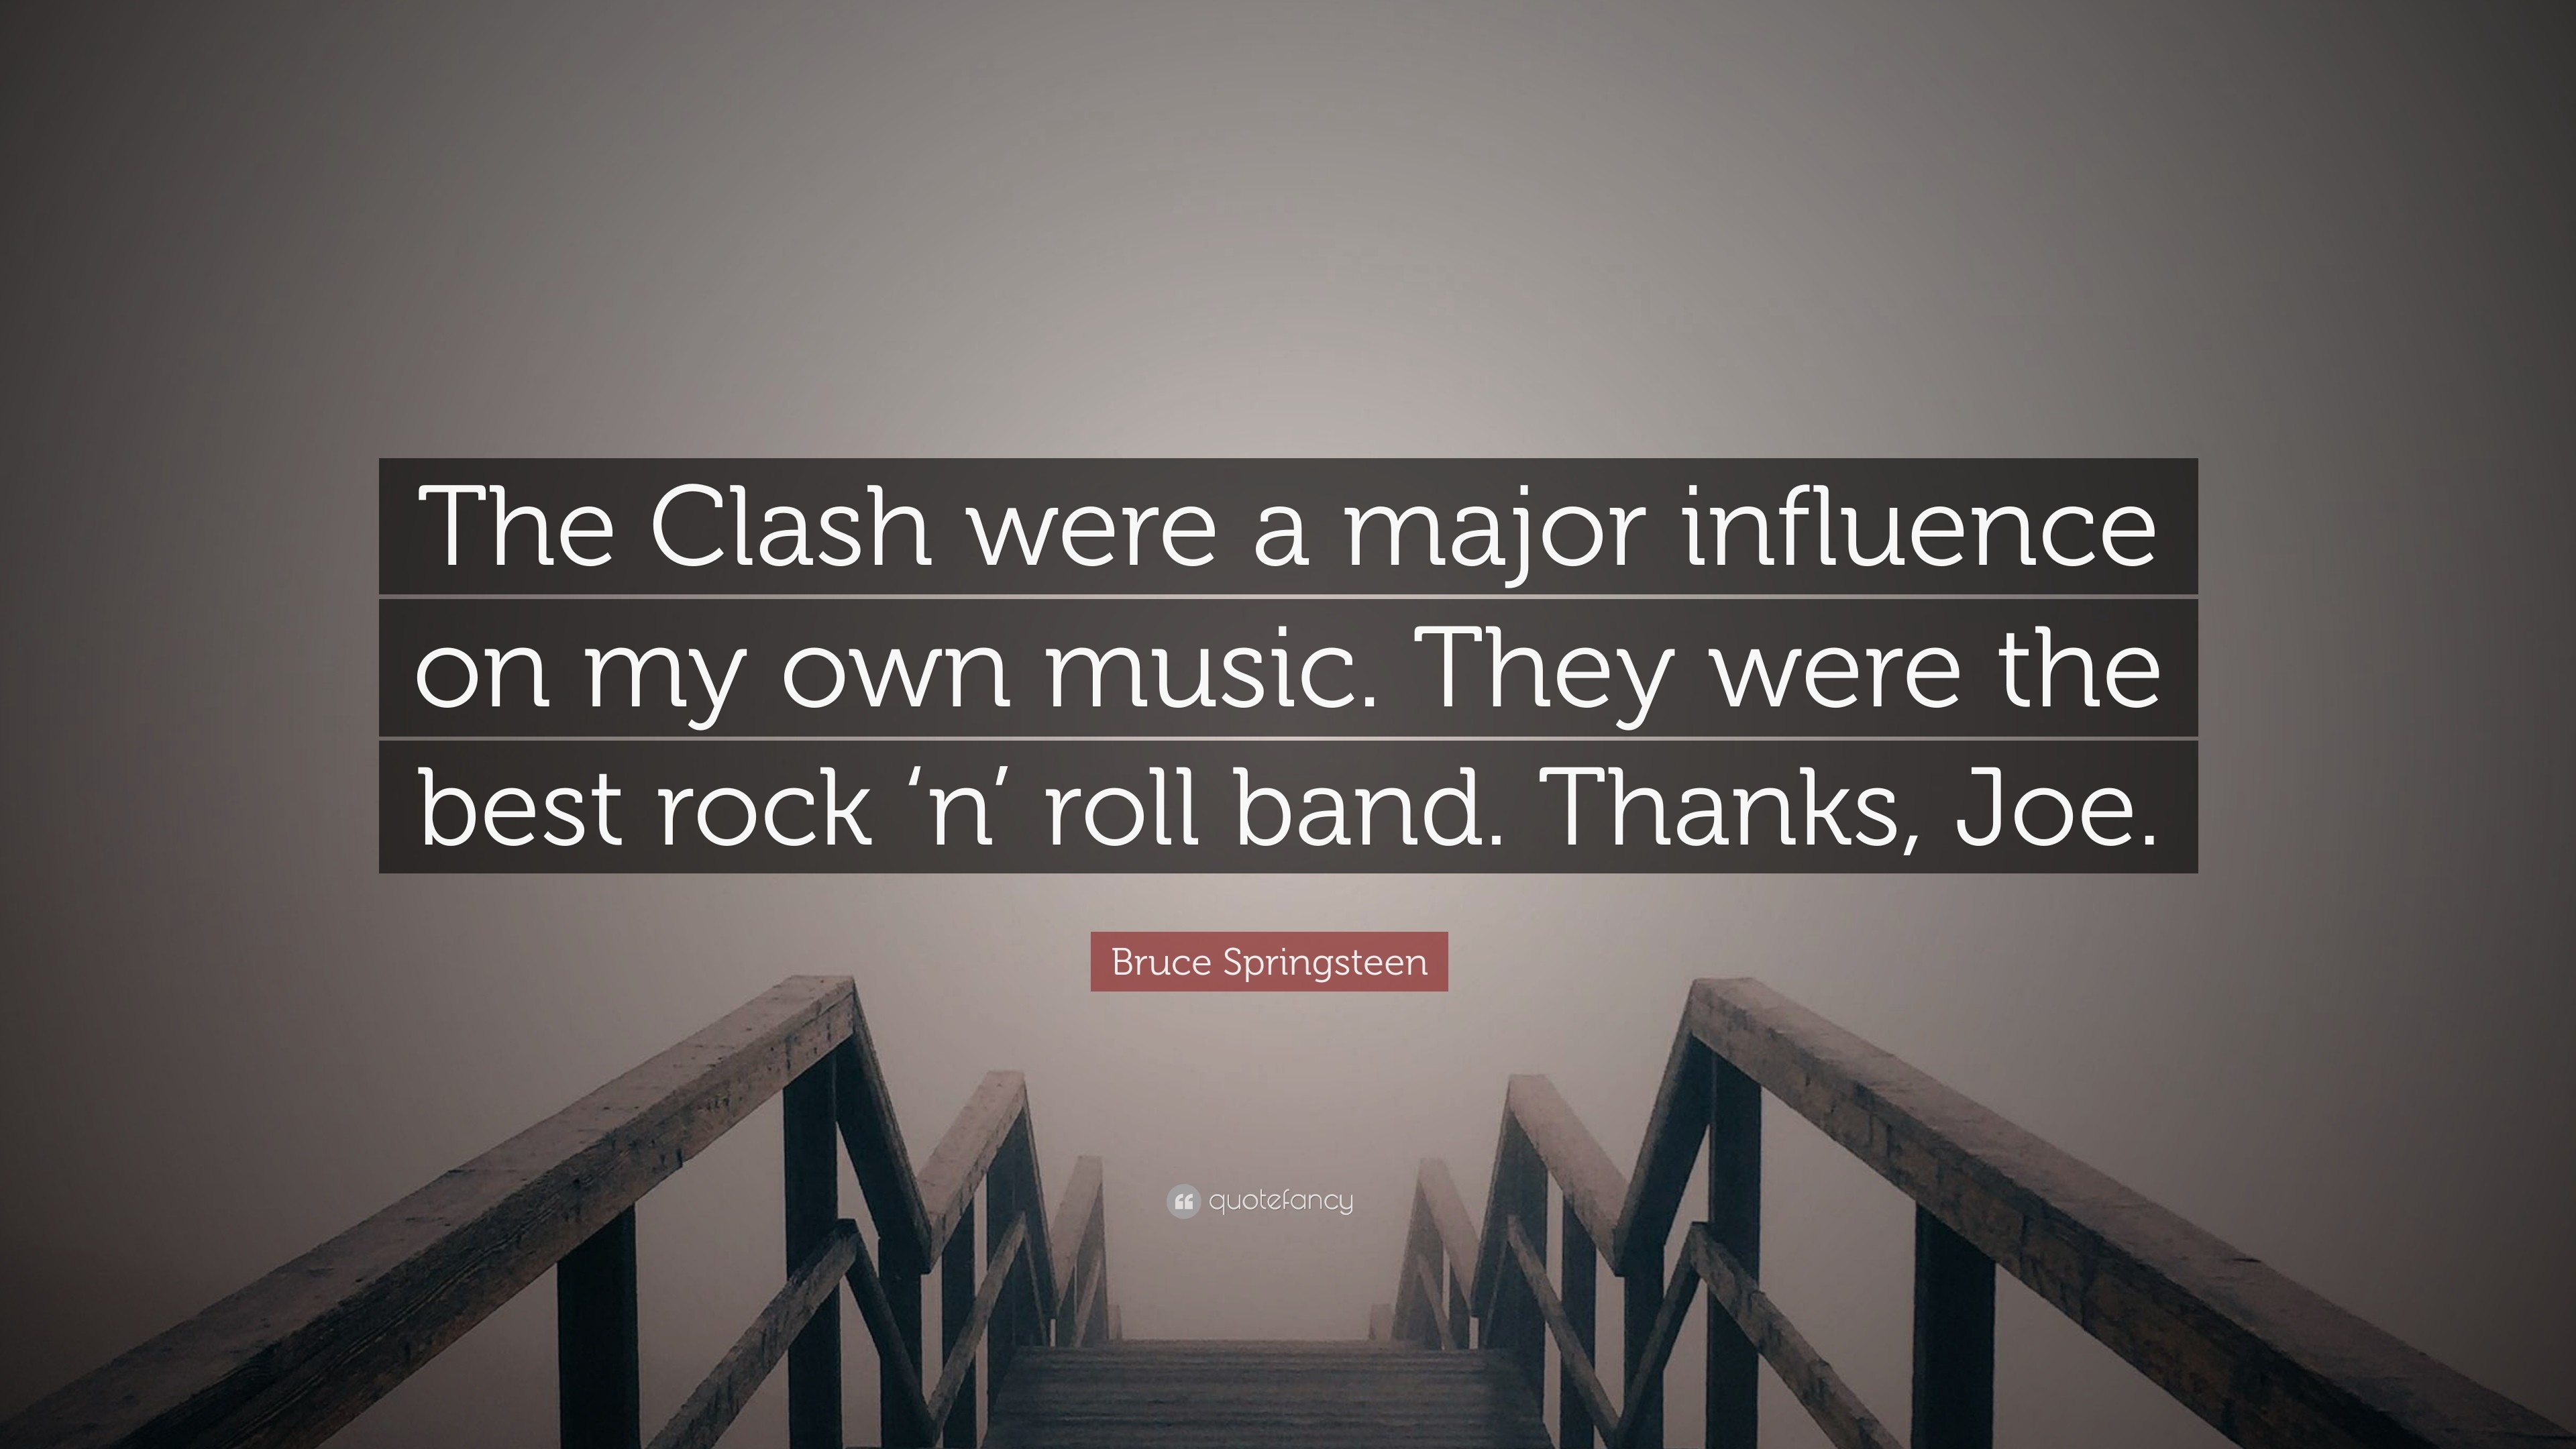 3840x2160 Bruce Springsteen Quote: “The Clash were a major influence on my own music.